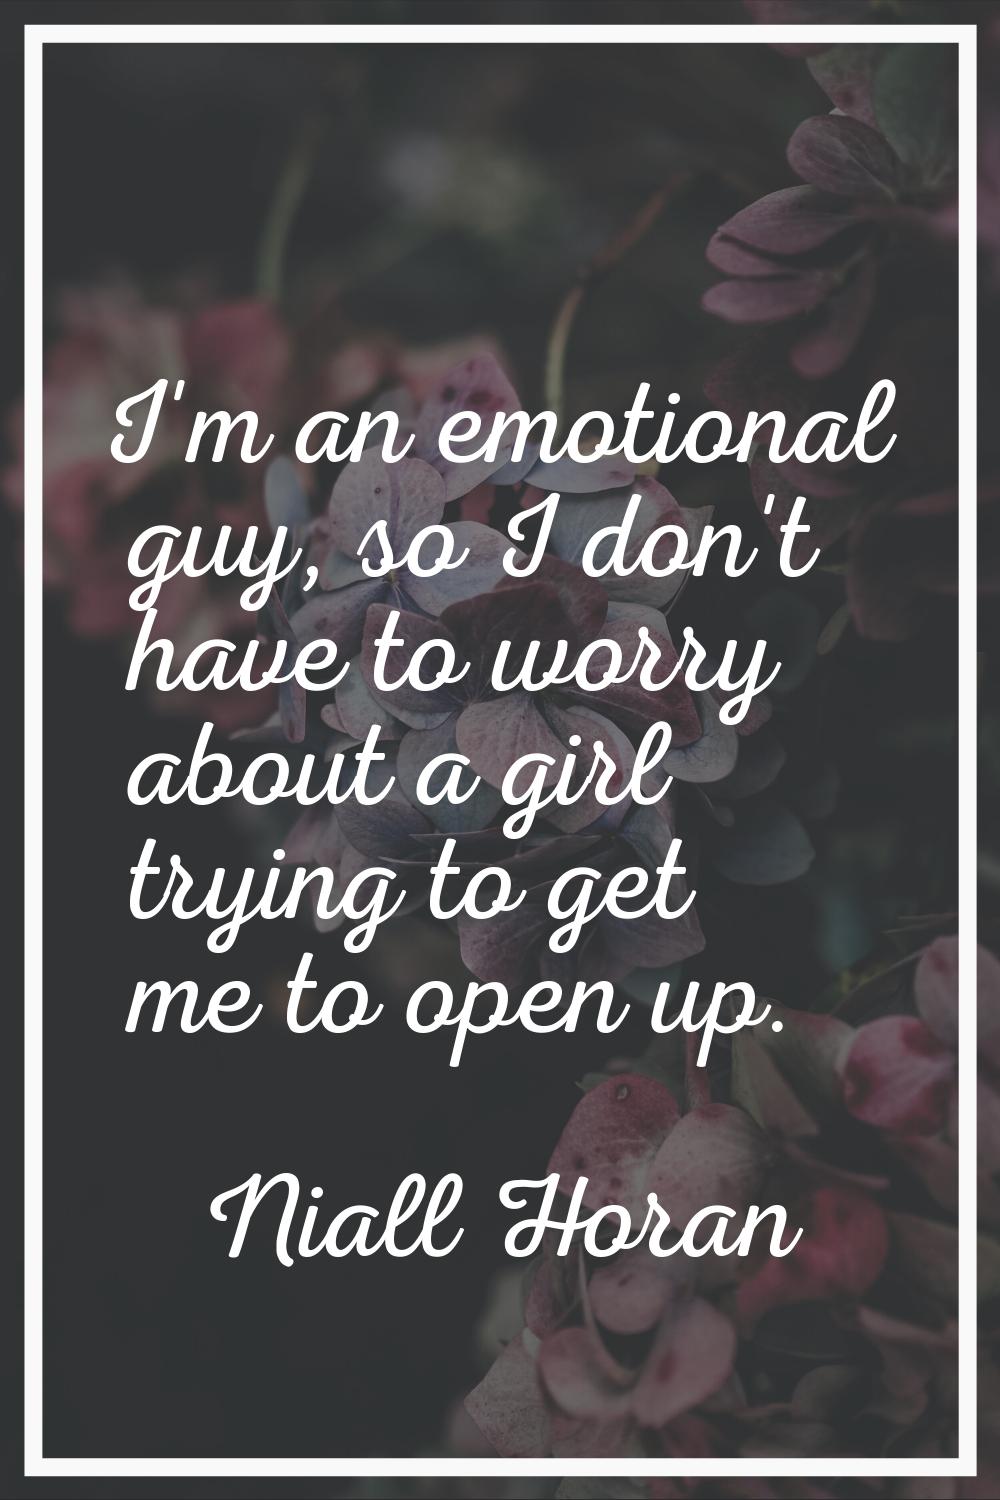 I'm an emotional guy, so I don't have to worry about a girl trying to get me to open up.